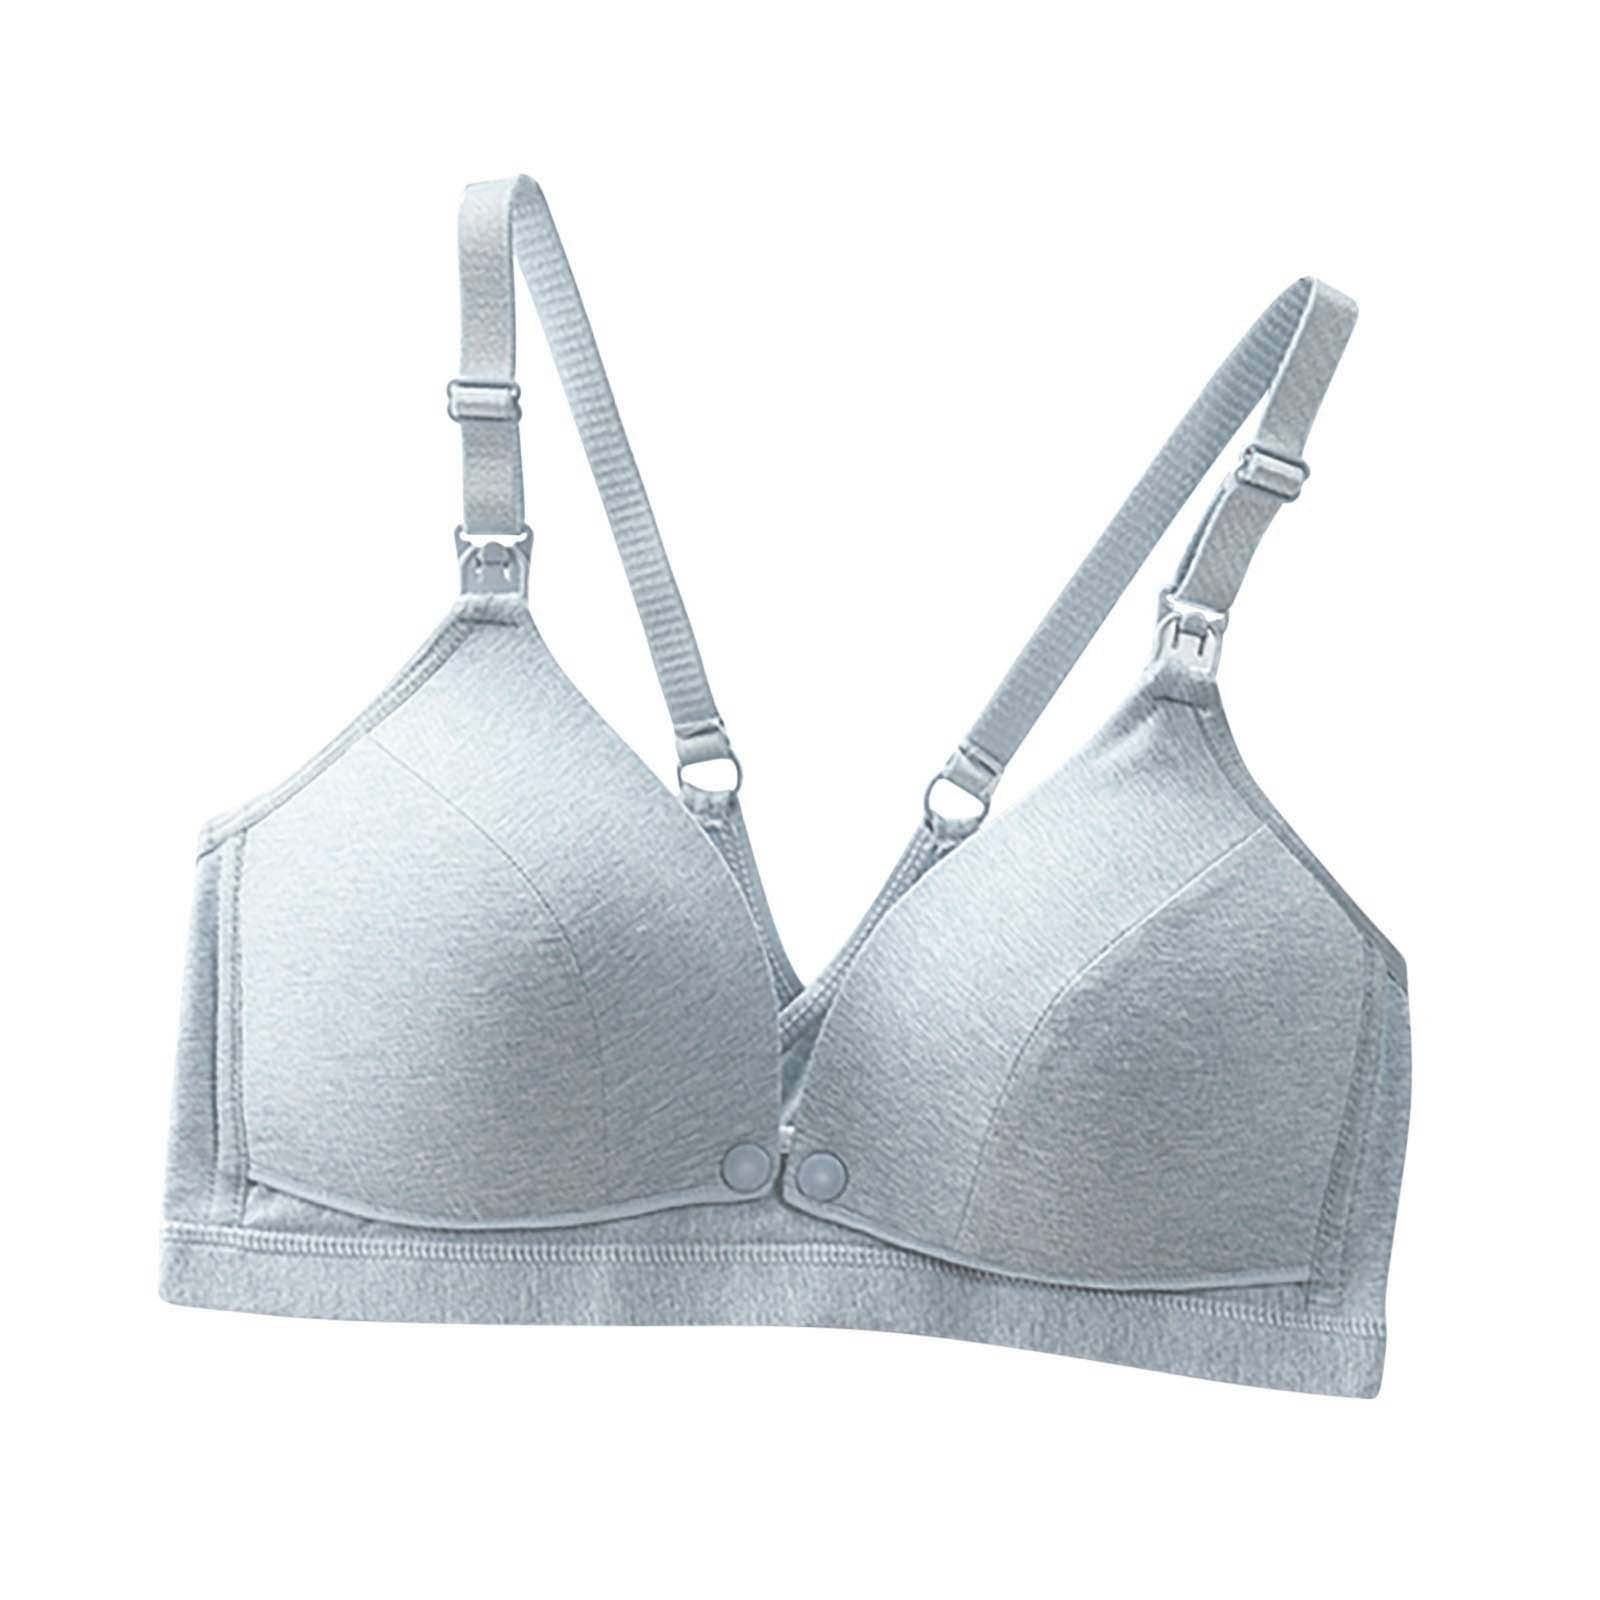 Buy Maternity Bra Online Starting at Rs 149 - NUTEX